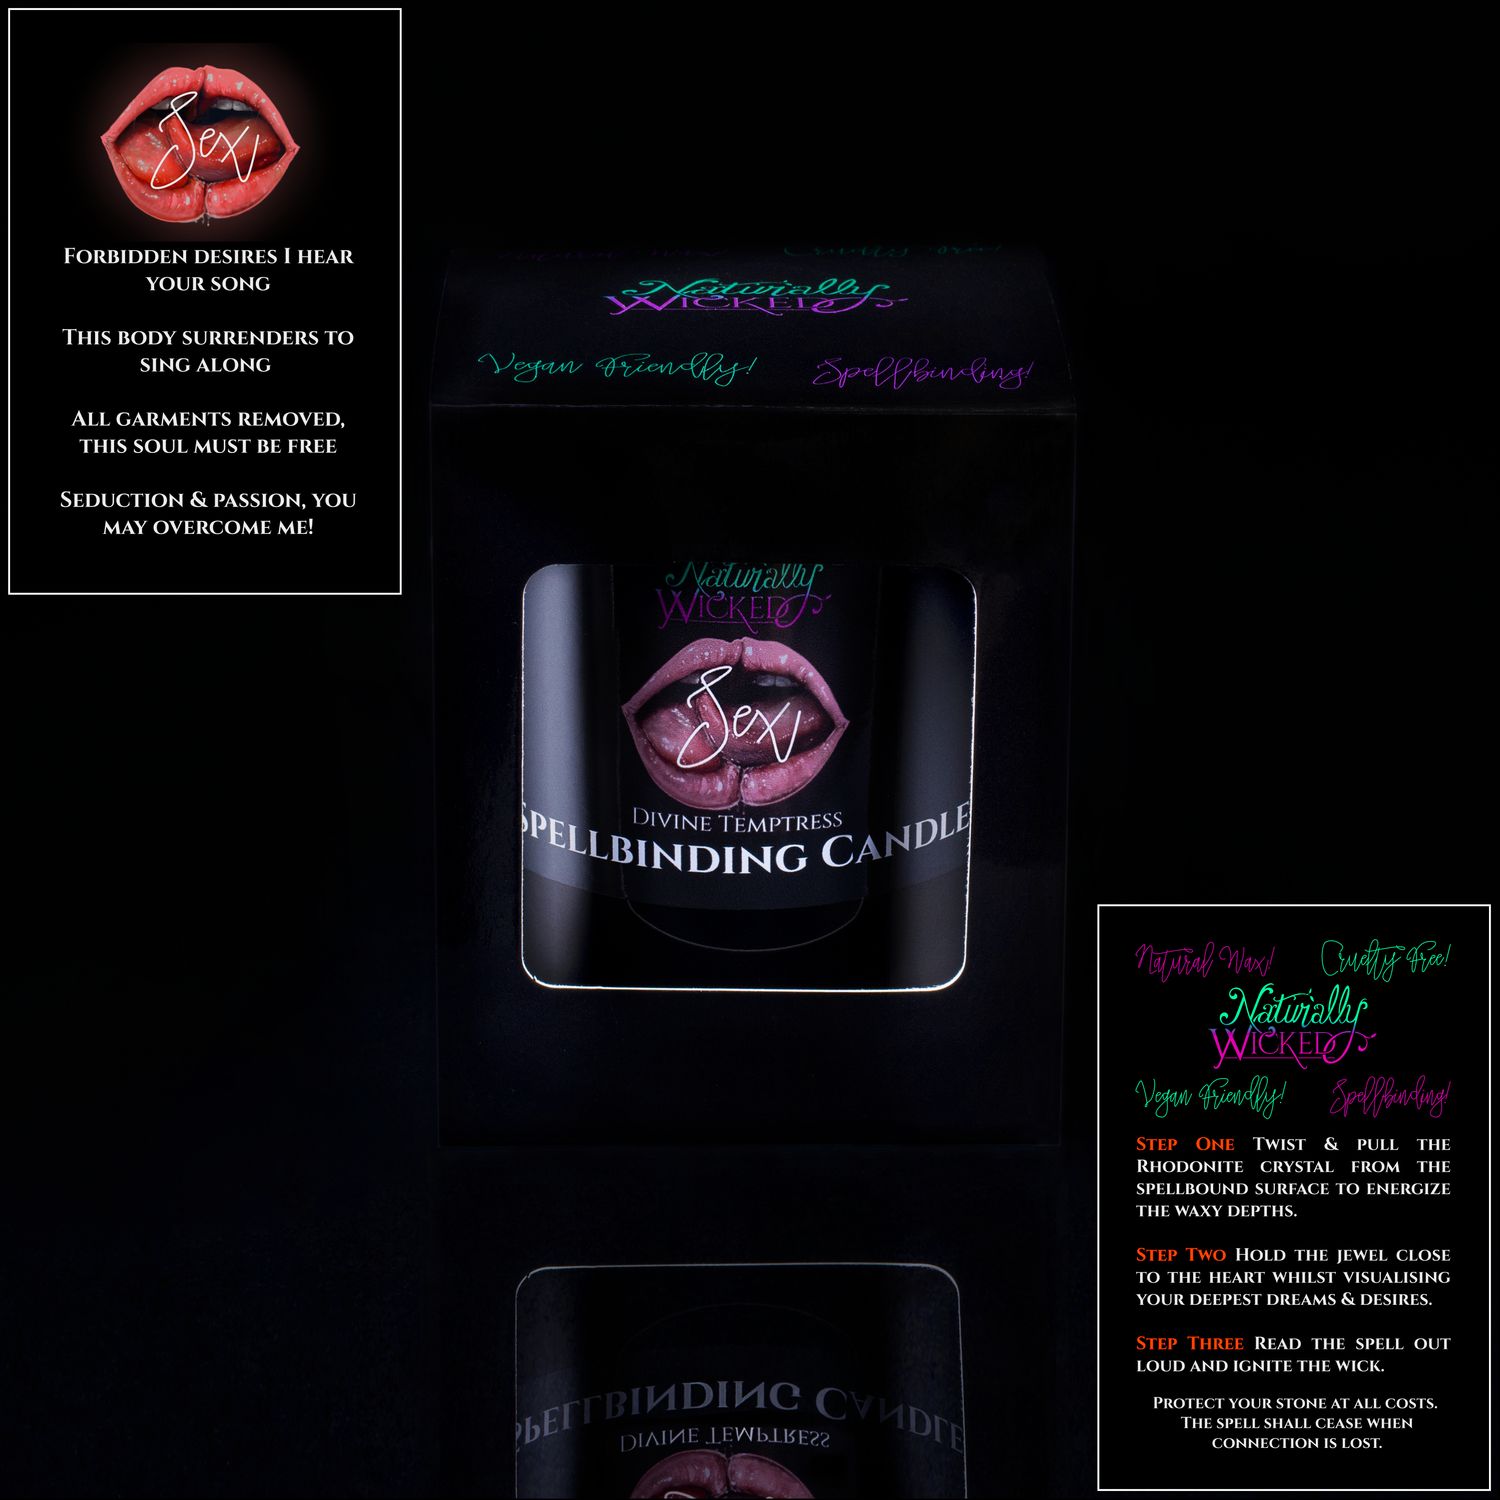 Turn Up The Heat And Cast The Perfect Sexy Spell With This Unique Spell Candle, Complete With A Double Sided Spell Card. Naturally Wicked Spellbinding Sex Candle Displayed In A Sleek Black Gloss Gift Box. The Candle Features Plant-Based Smooth Pink Wax, A Wood Wick And A Beautiful Rhodonite Crystal.